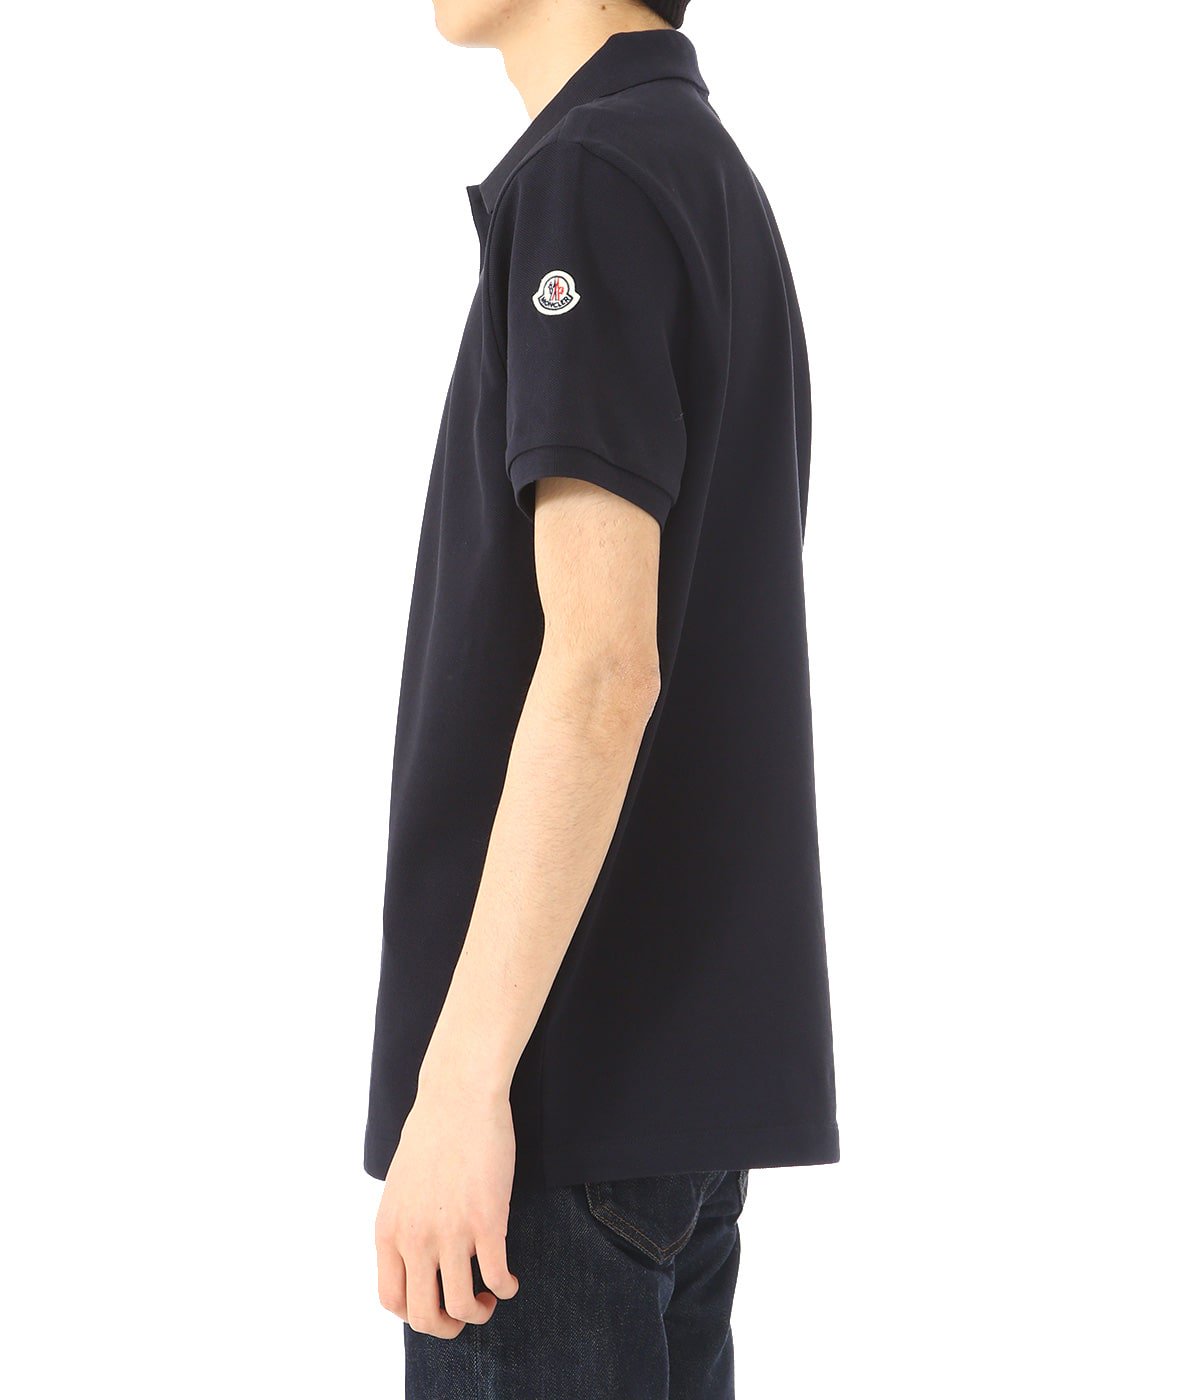 MAGLIA POLO MANICA CORTA | MONCLER(モンクレール) / トップス ポロシャツ (メンズ)の通販 -  ARKnets(アークネッツ) 公式通販 【正規取扱店】